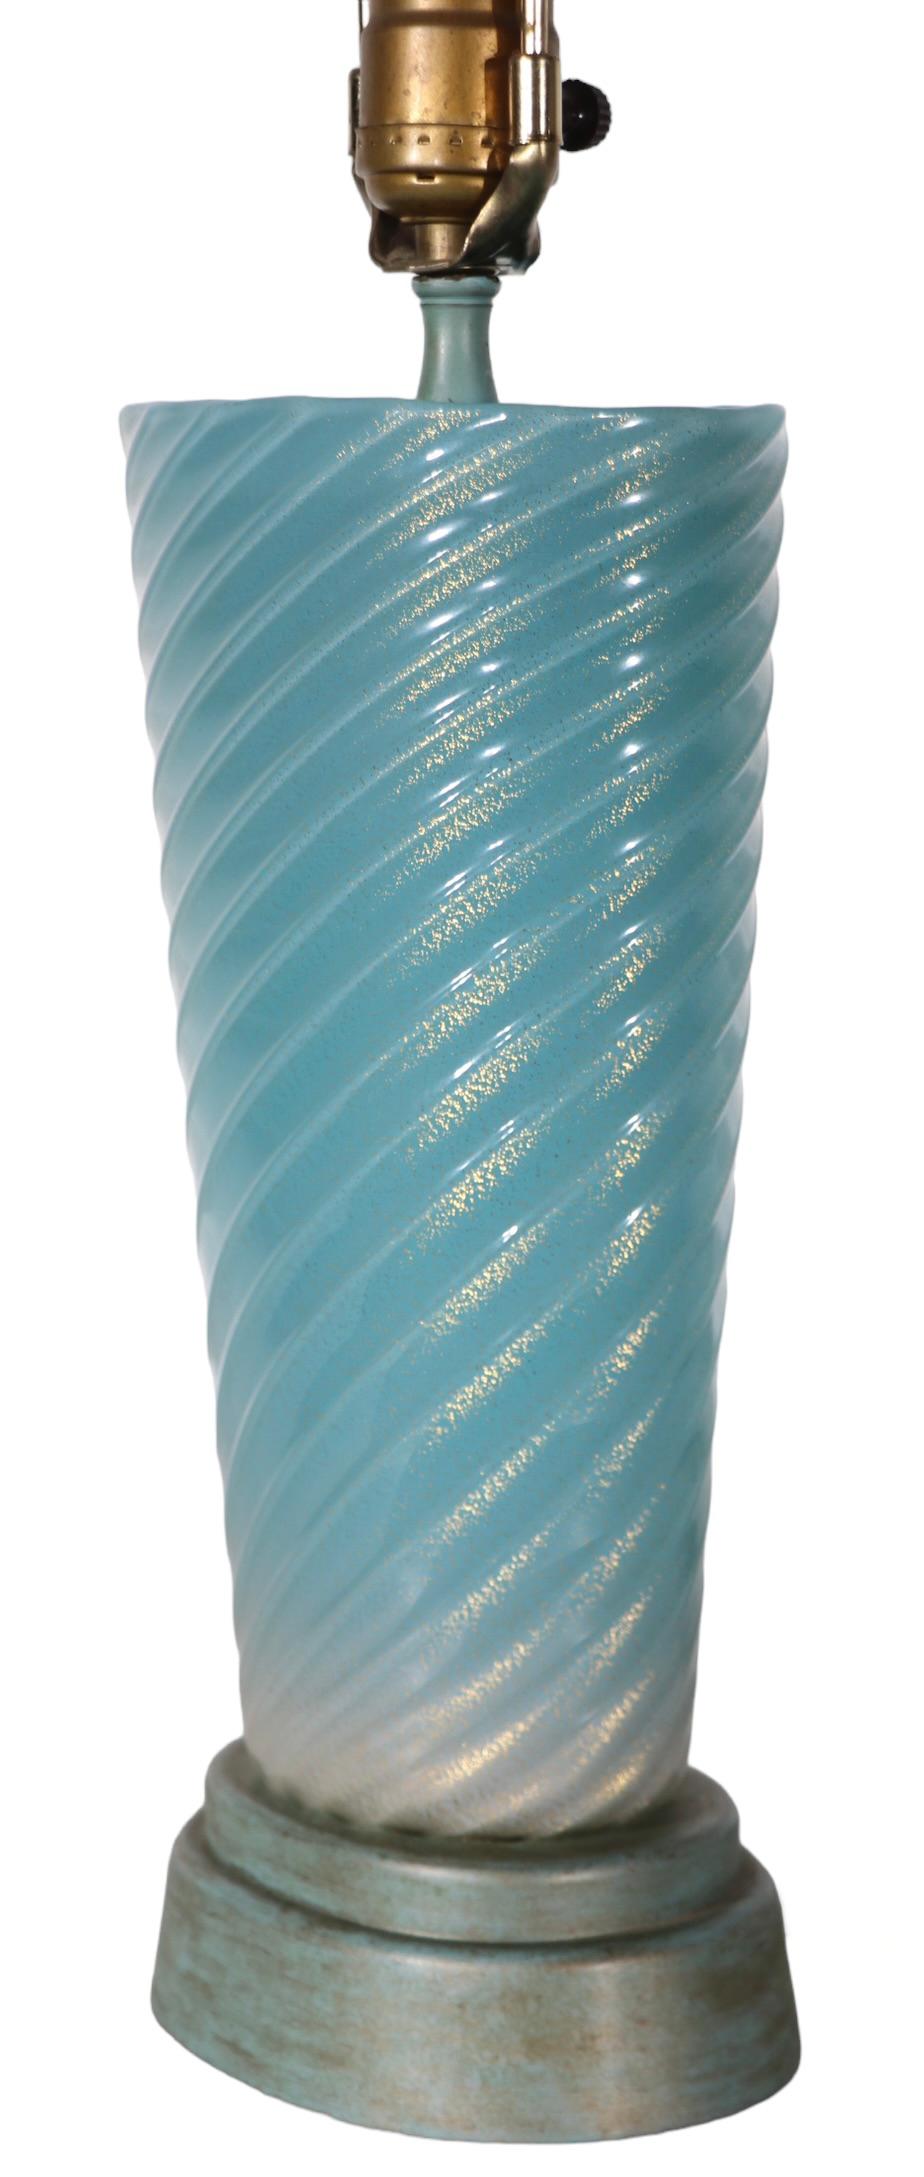 Murano Glass Lamp Blue Swirl with Gold Inclusion possibly Fratelli Toso, Seguso  For Sale 9